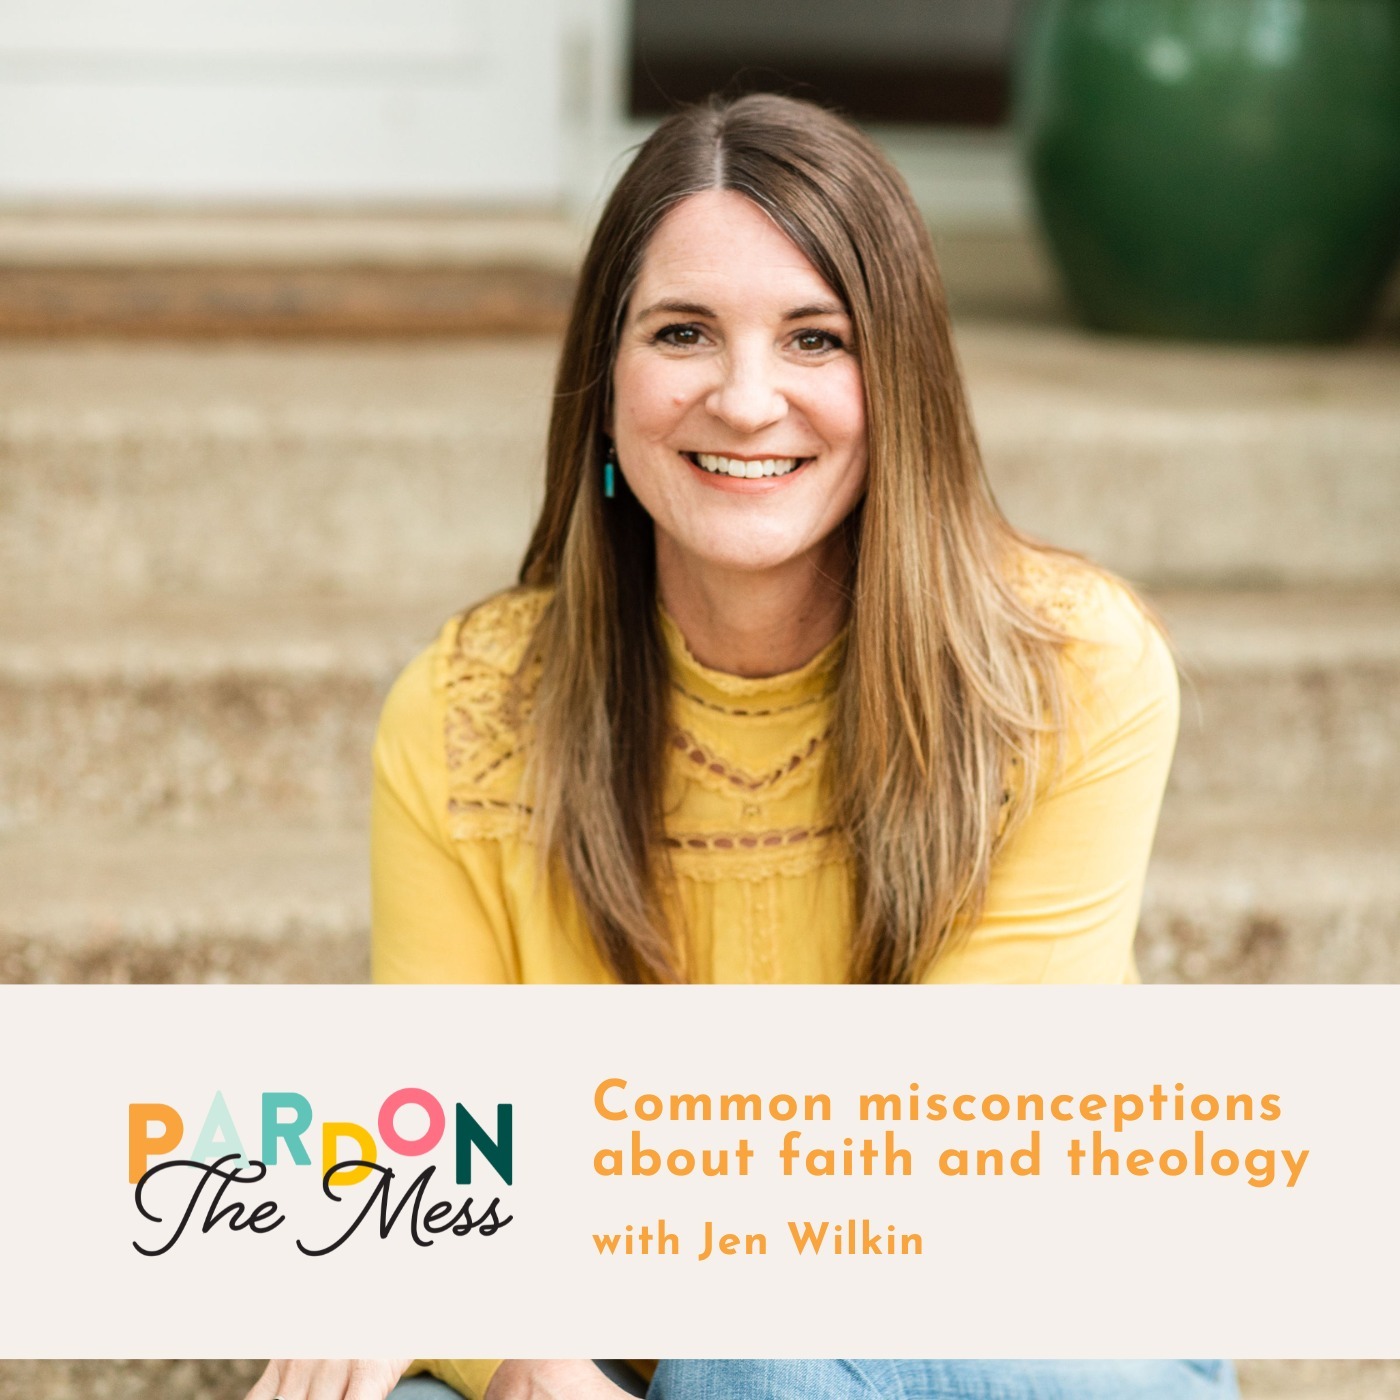 Common misconceptions about faith and theology with Jen Wilkin